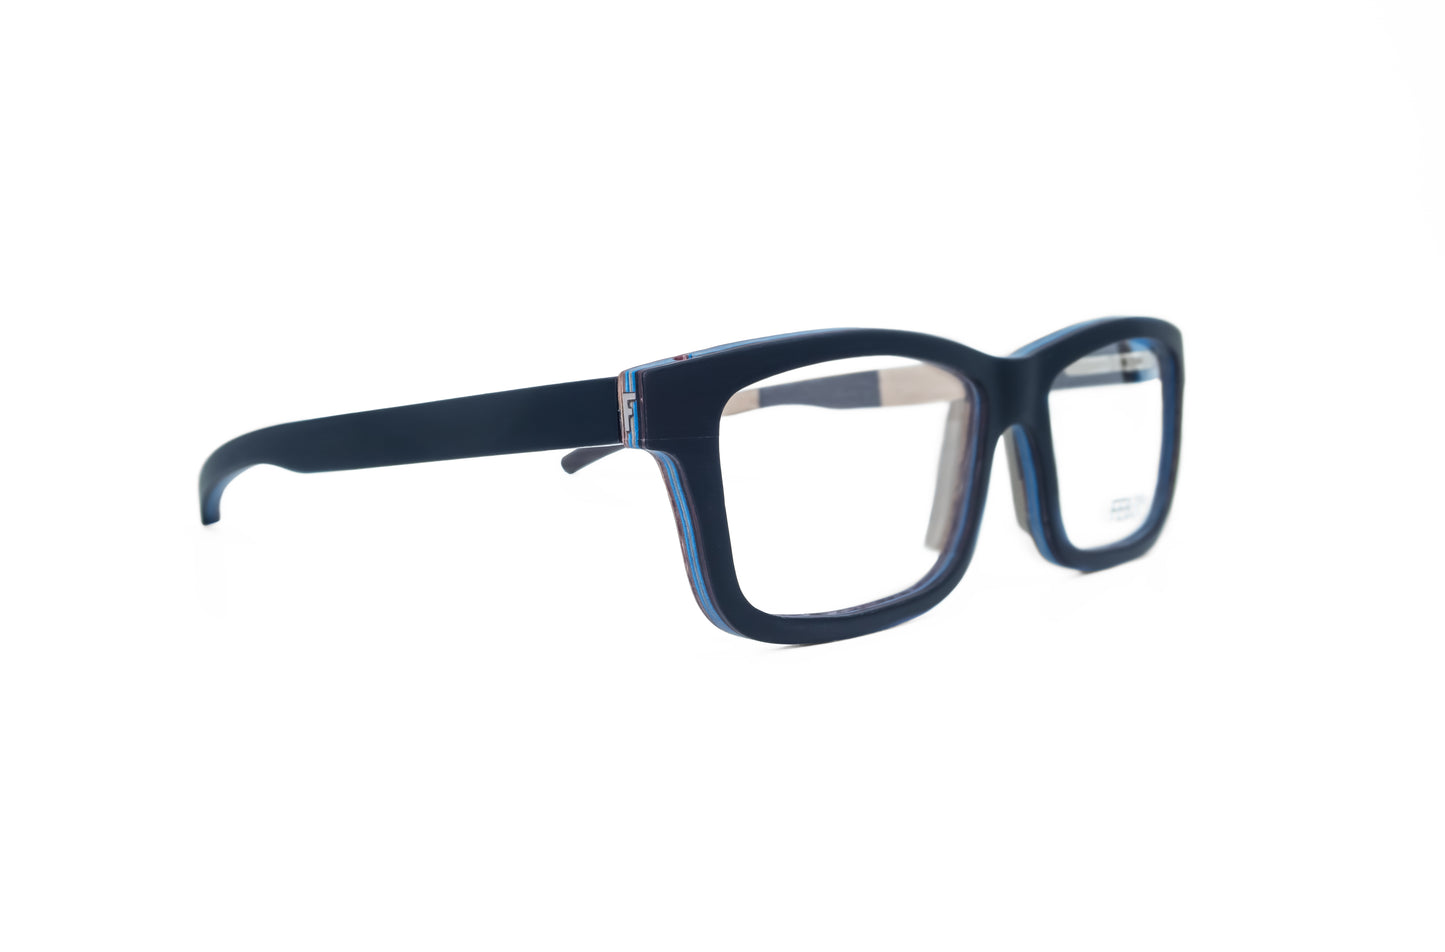 Apus Air by FEB31st wooden glasses brown/blue